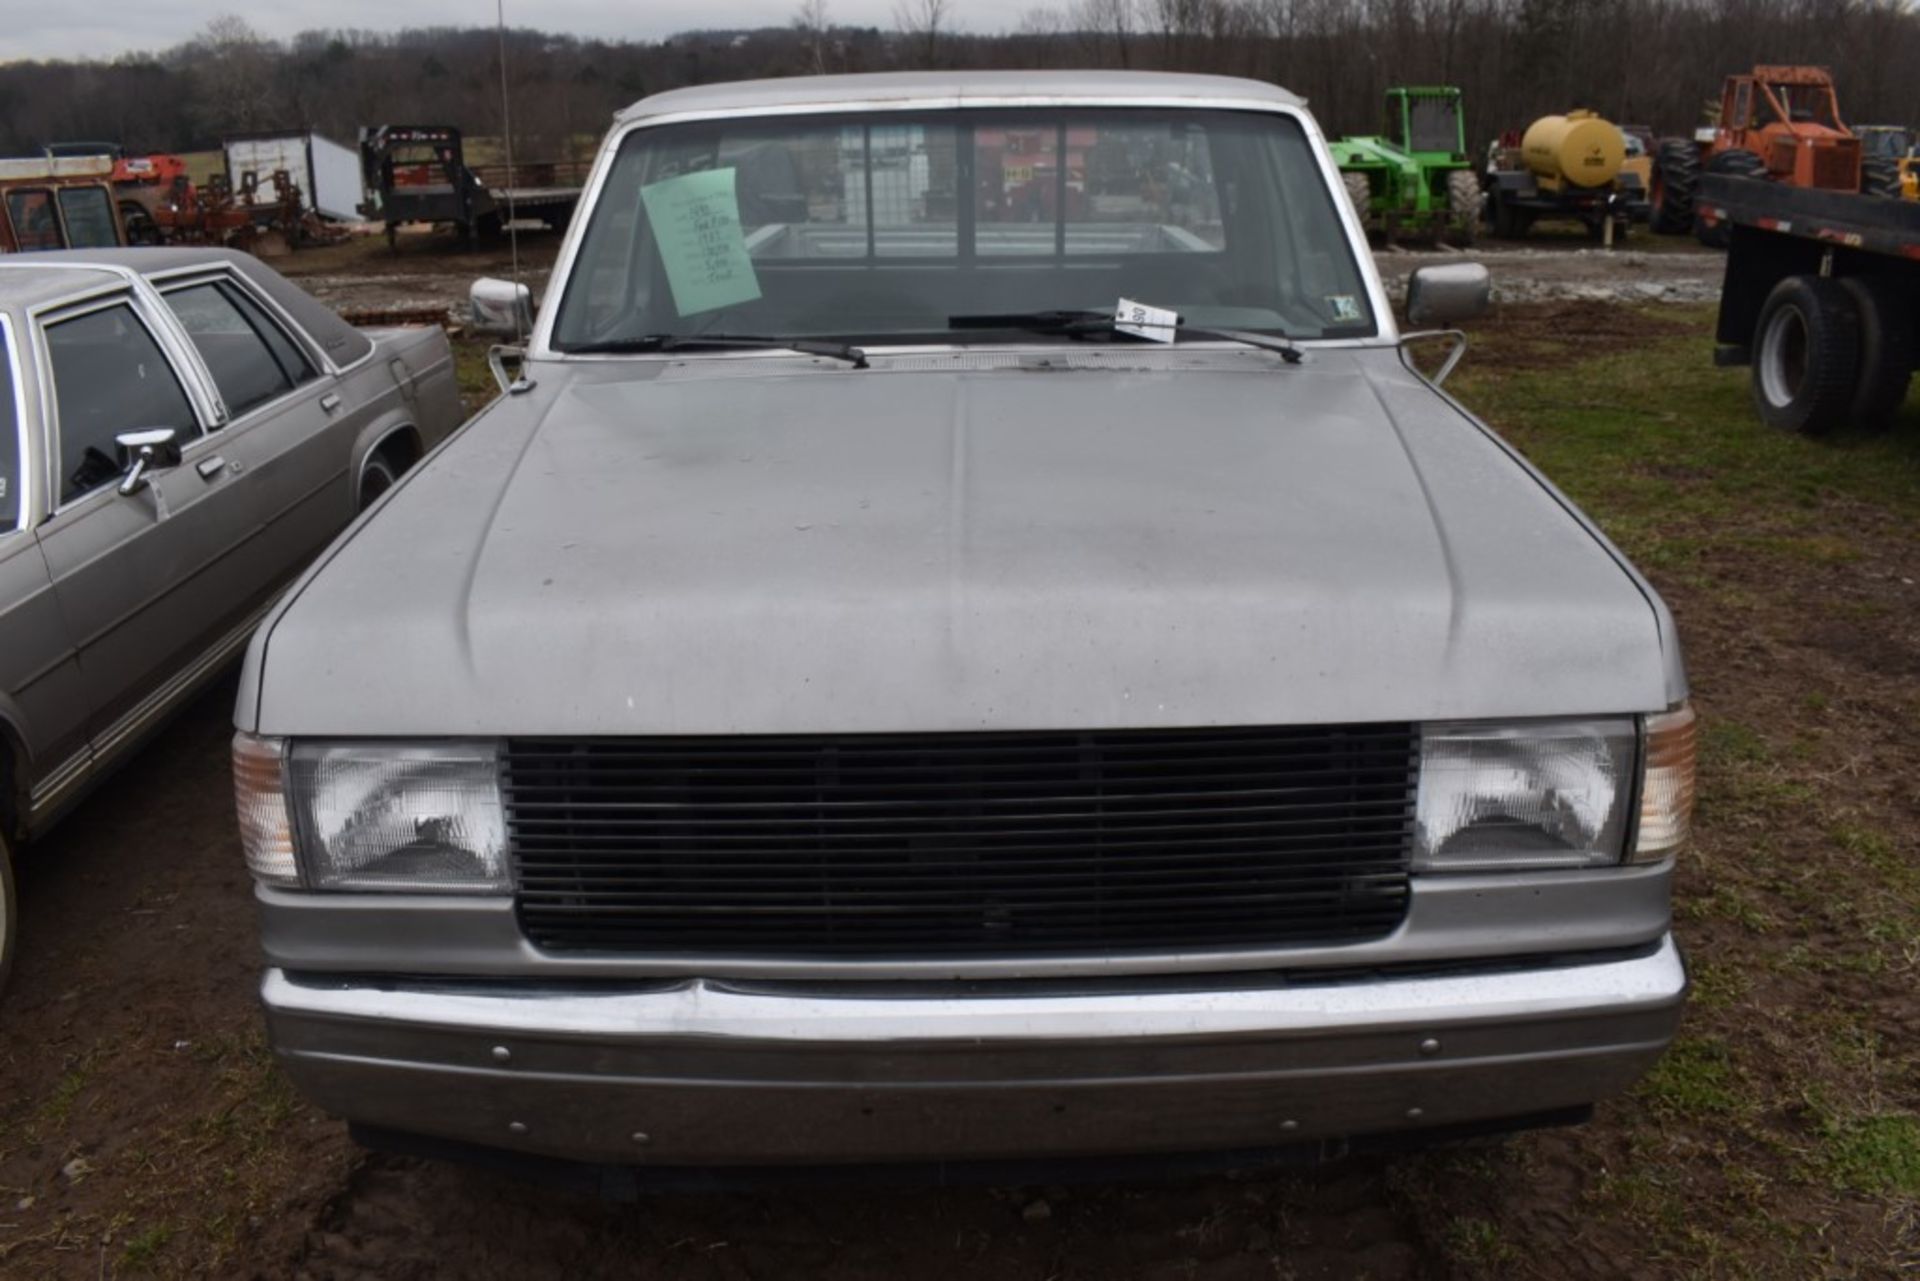 1987 Ford F-150 Truck - Image 4 of 36